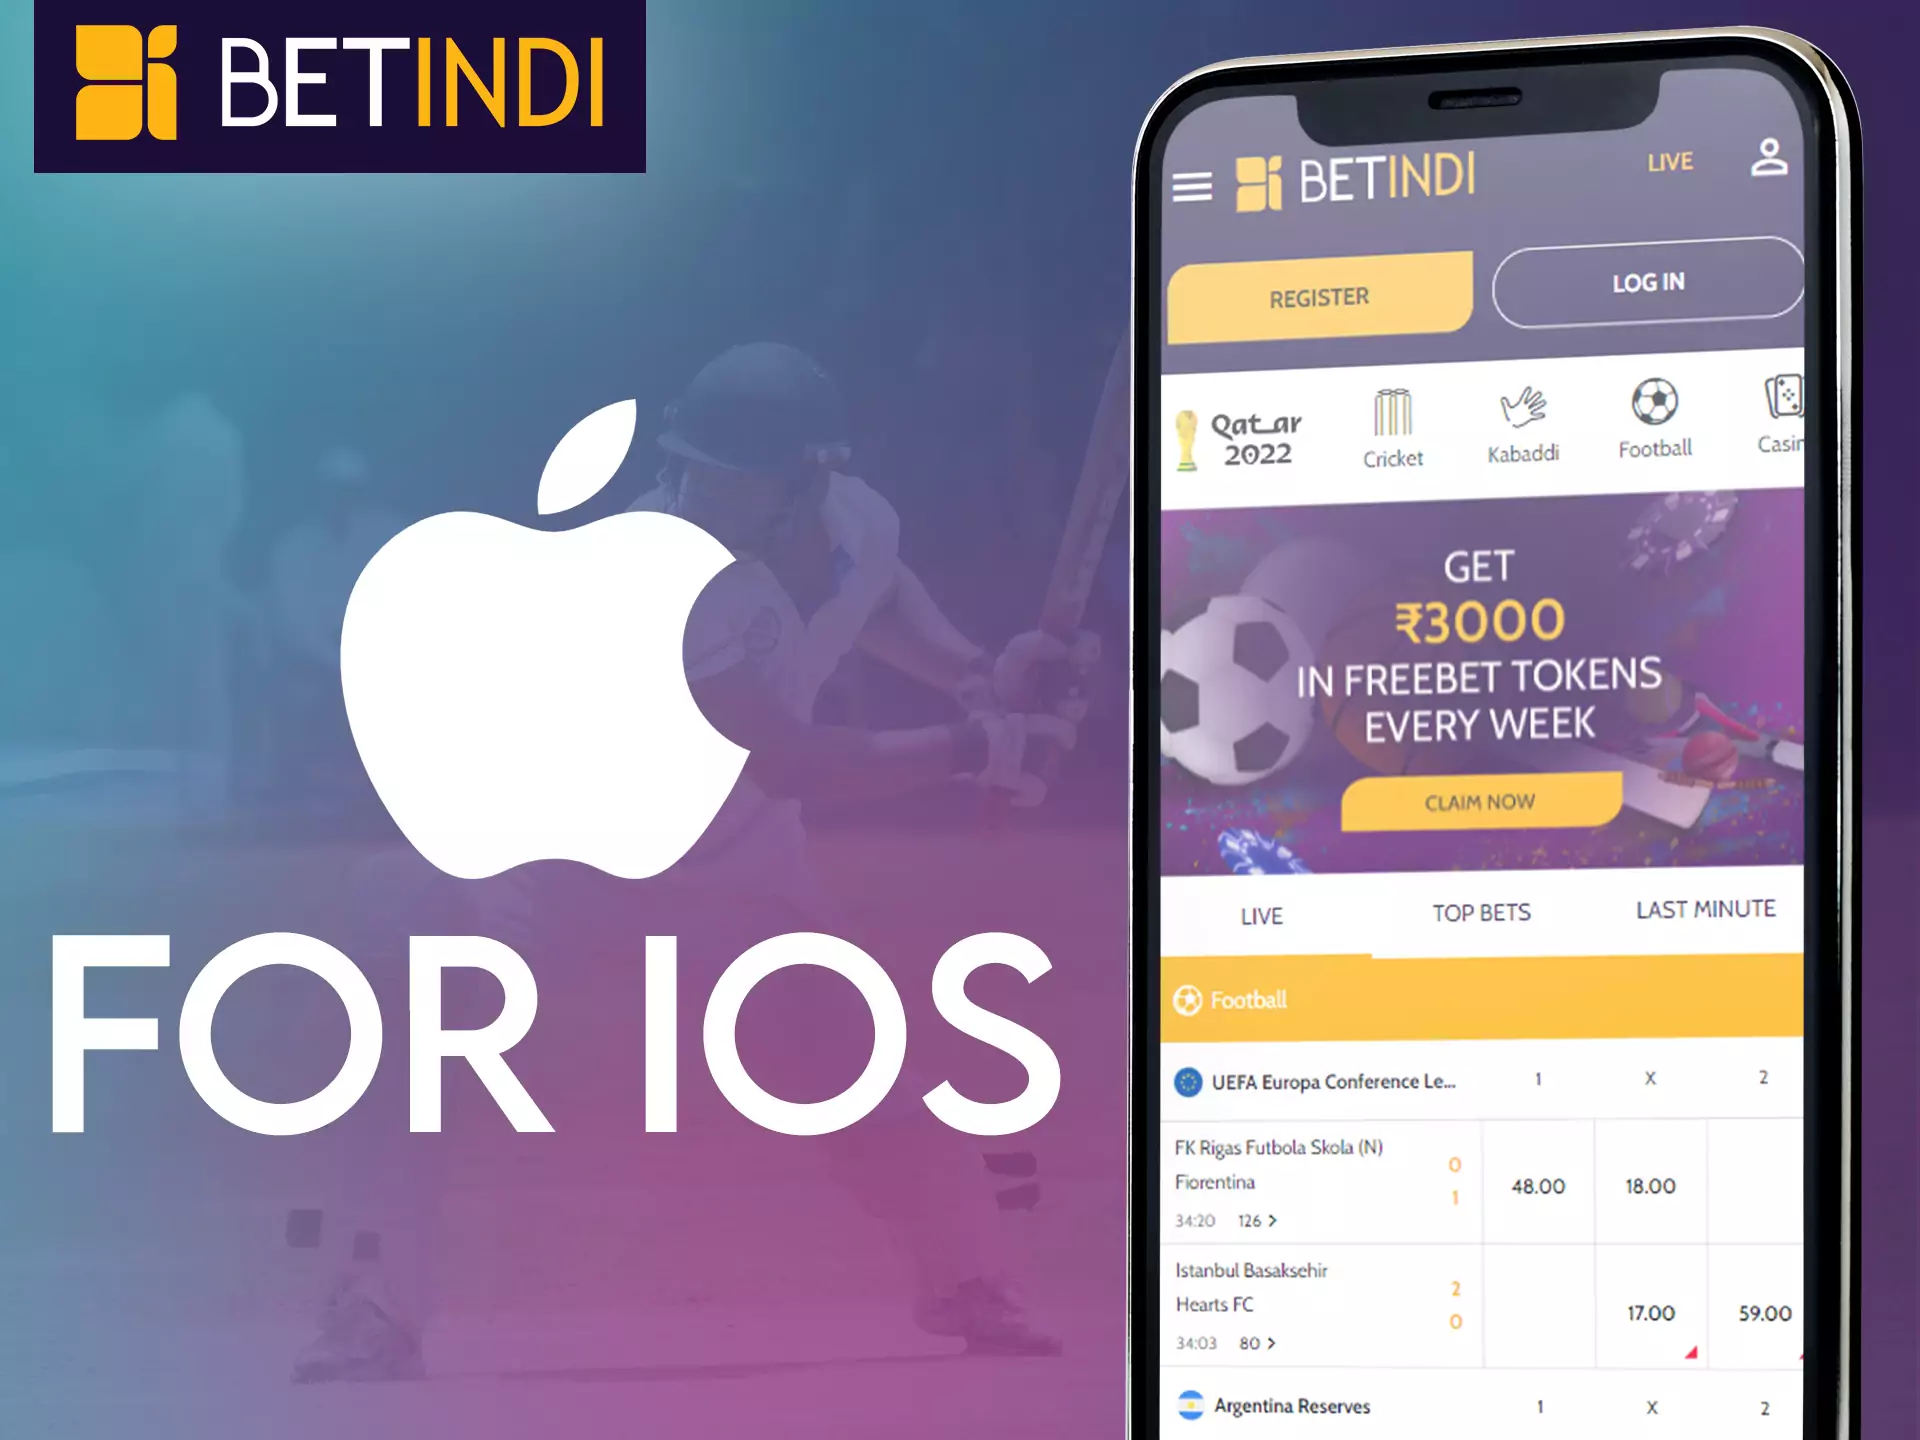 Betindi offers to place bets and play on iOS devices.